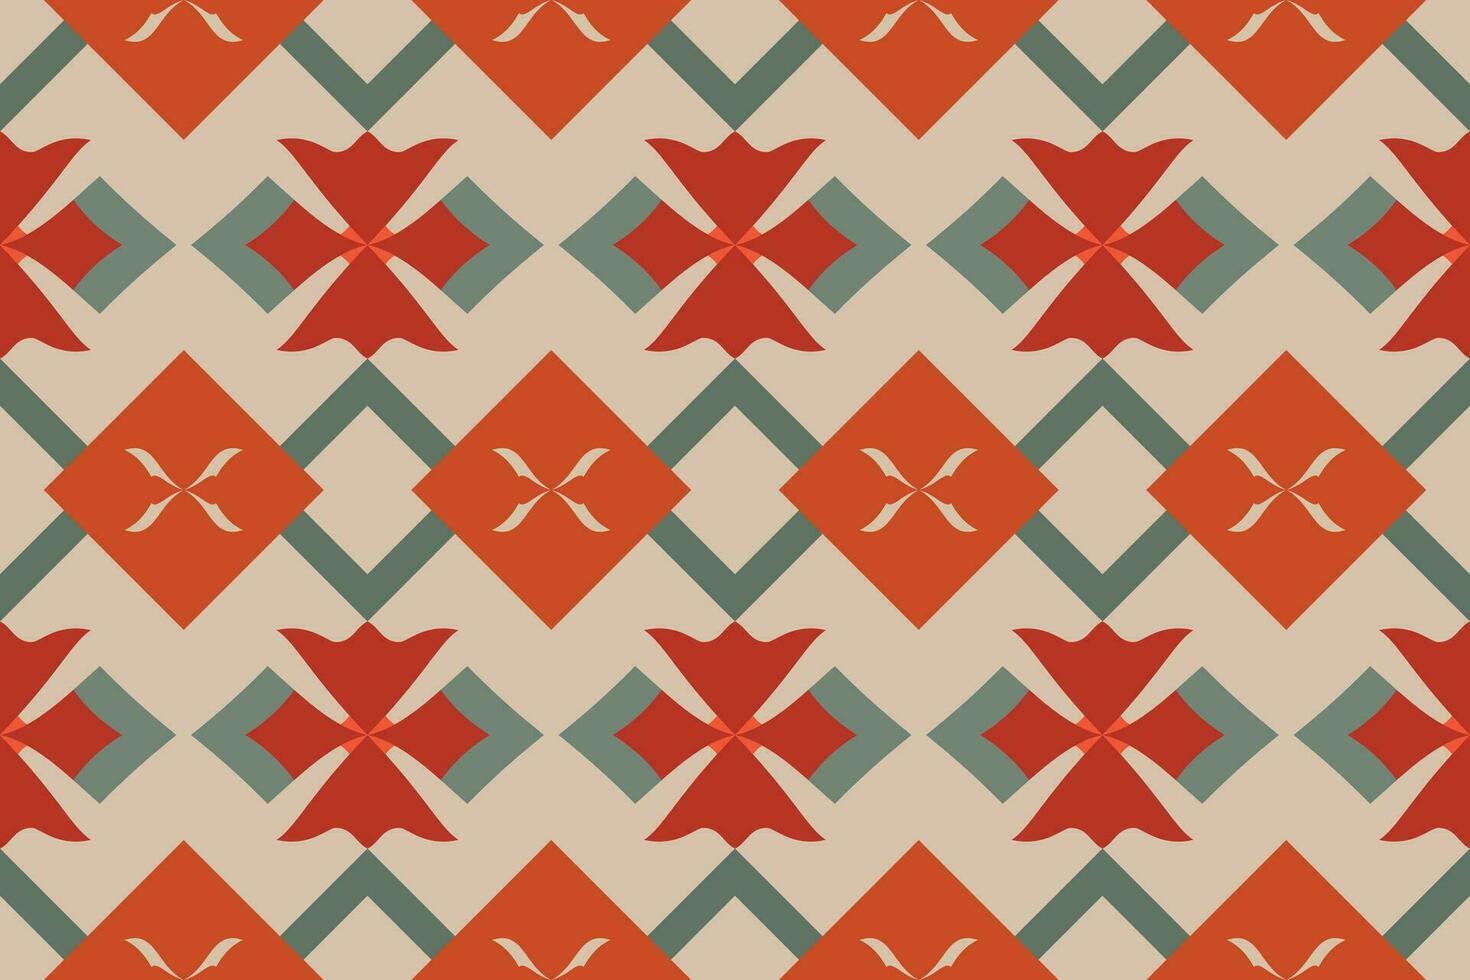 Modern geometric shapes patterns, seamless vector illustration. Pattern designs with modern geometric shapes can be printed as a background image or used for rugs, carpets, or textile fabric.